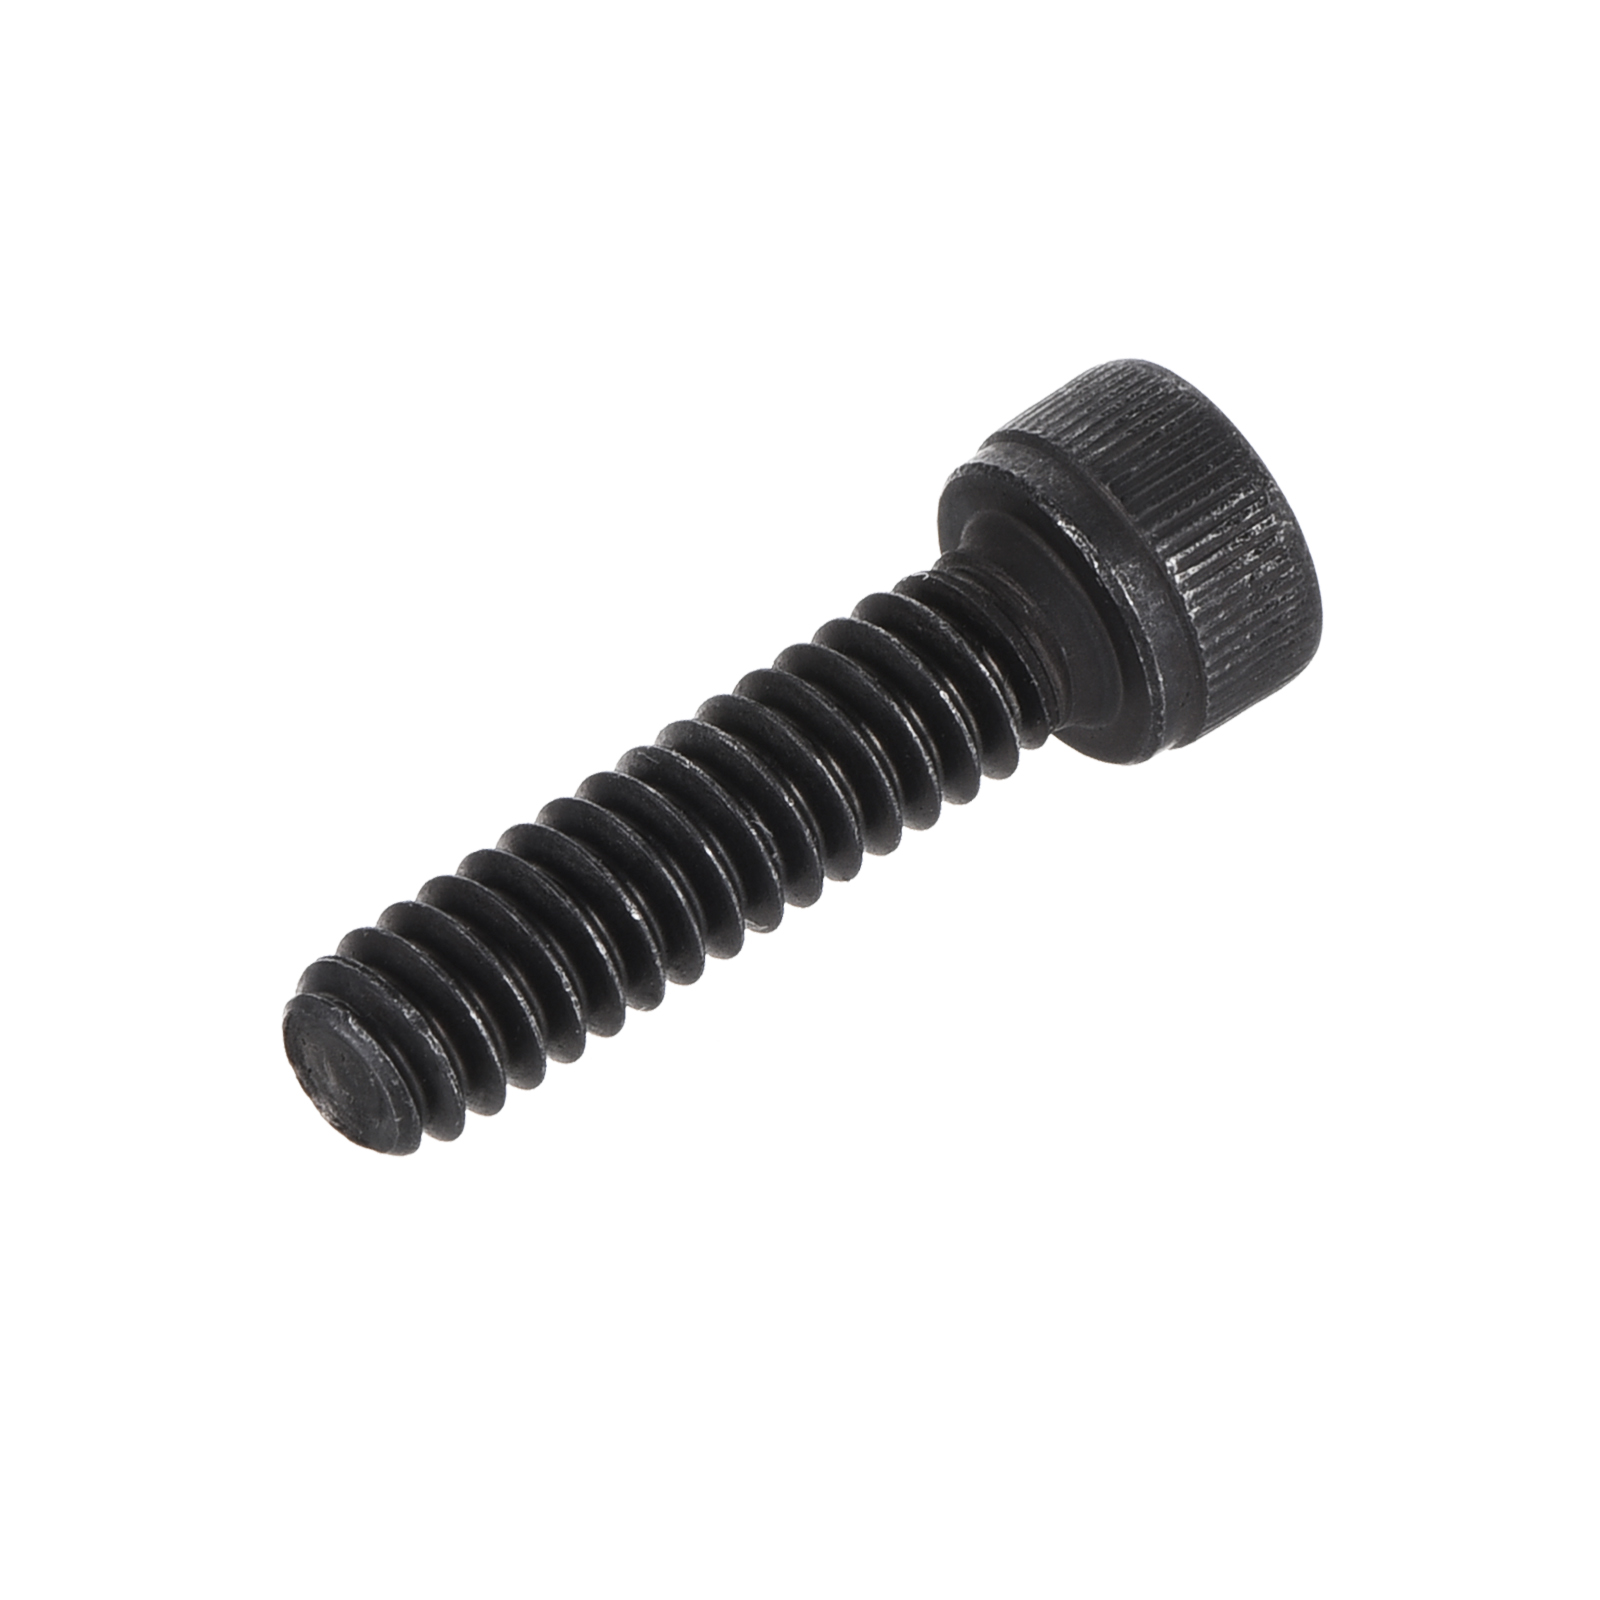 #10-24x3/4" Hex Socket Head Bolts 12.9 Alloy Steel 25 Pack - image 5 of 5